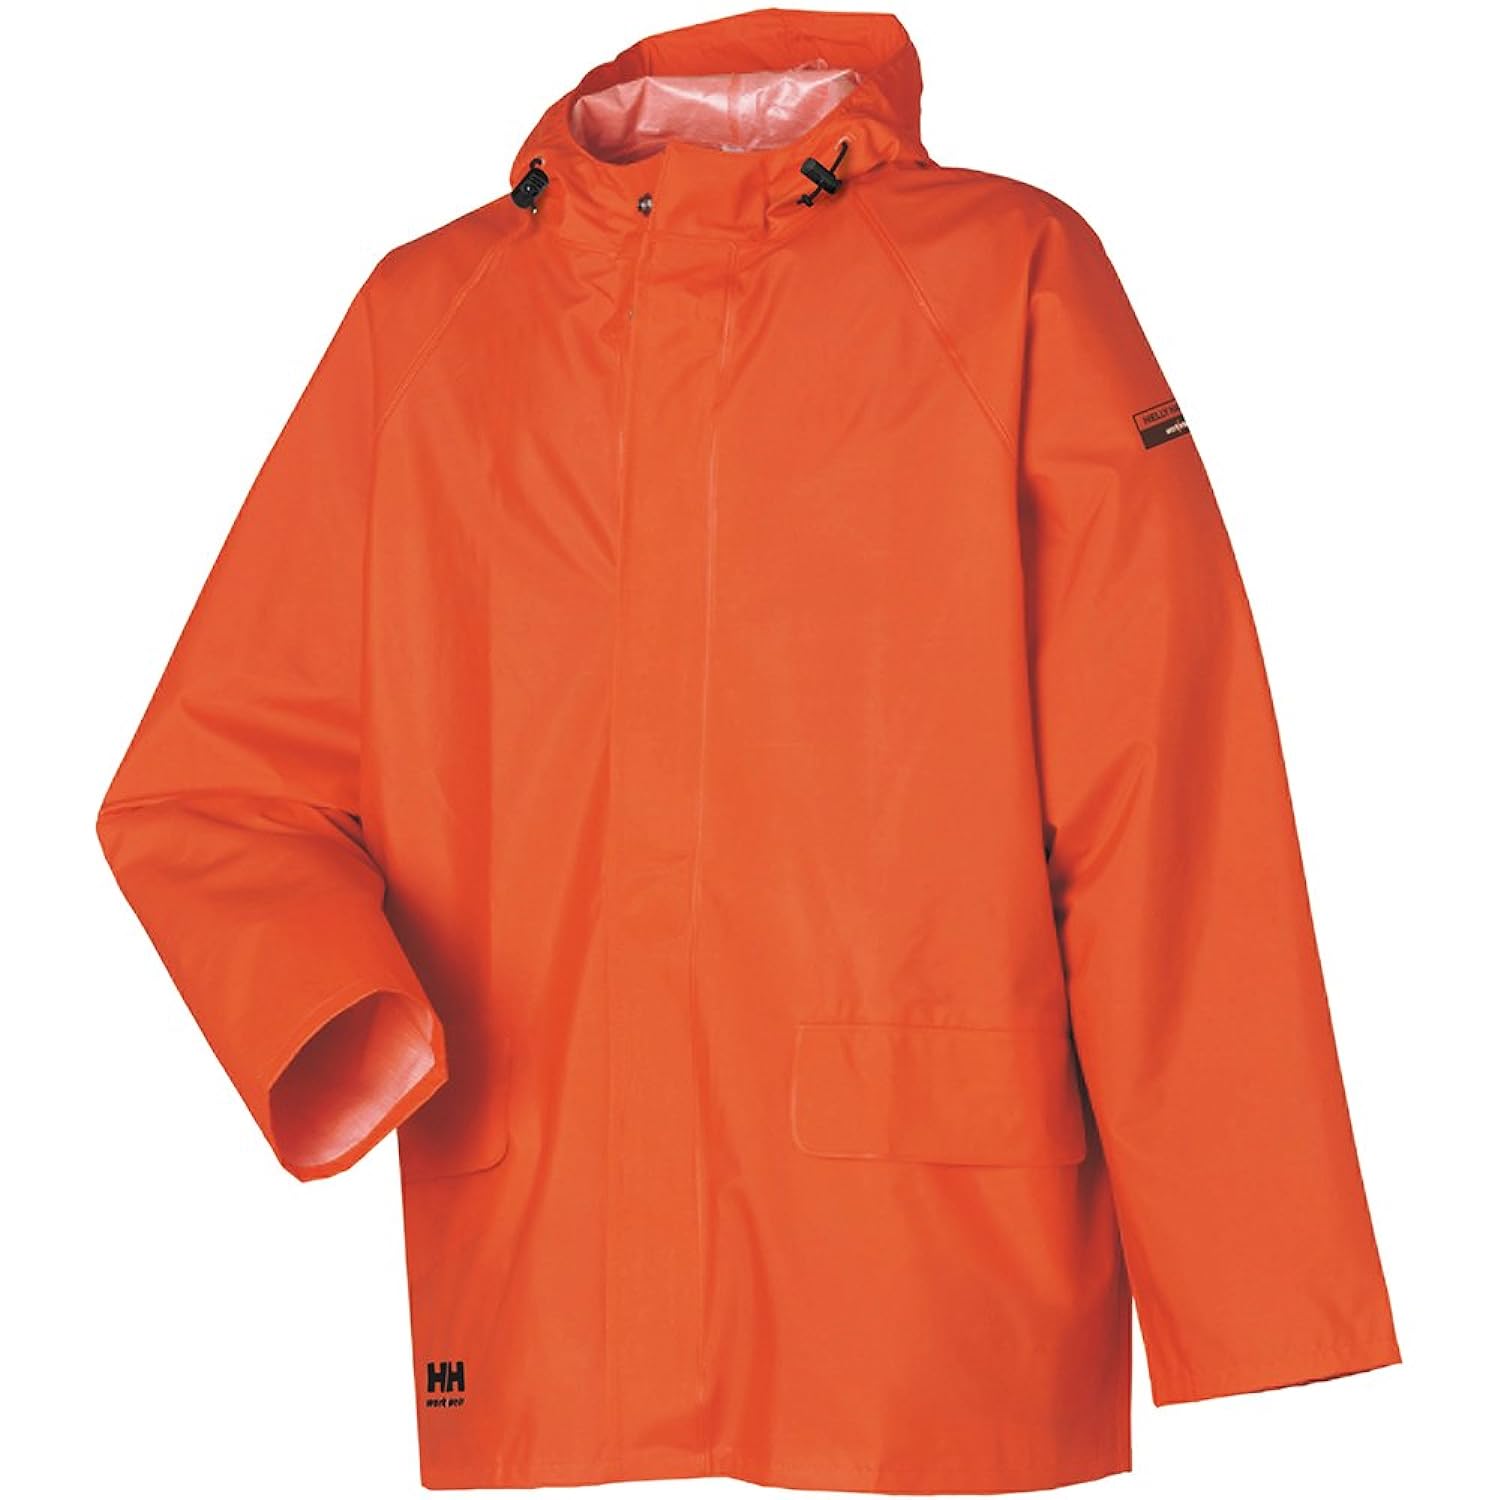 Men’s insulated rain jacket – A Stylish and Practical Jacket插图4